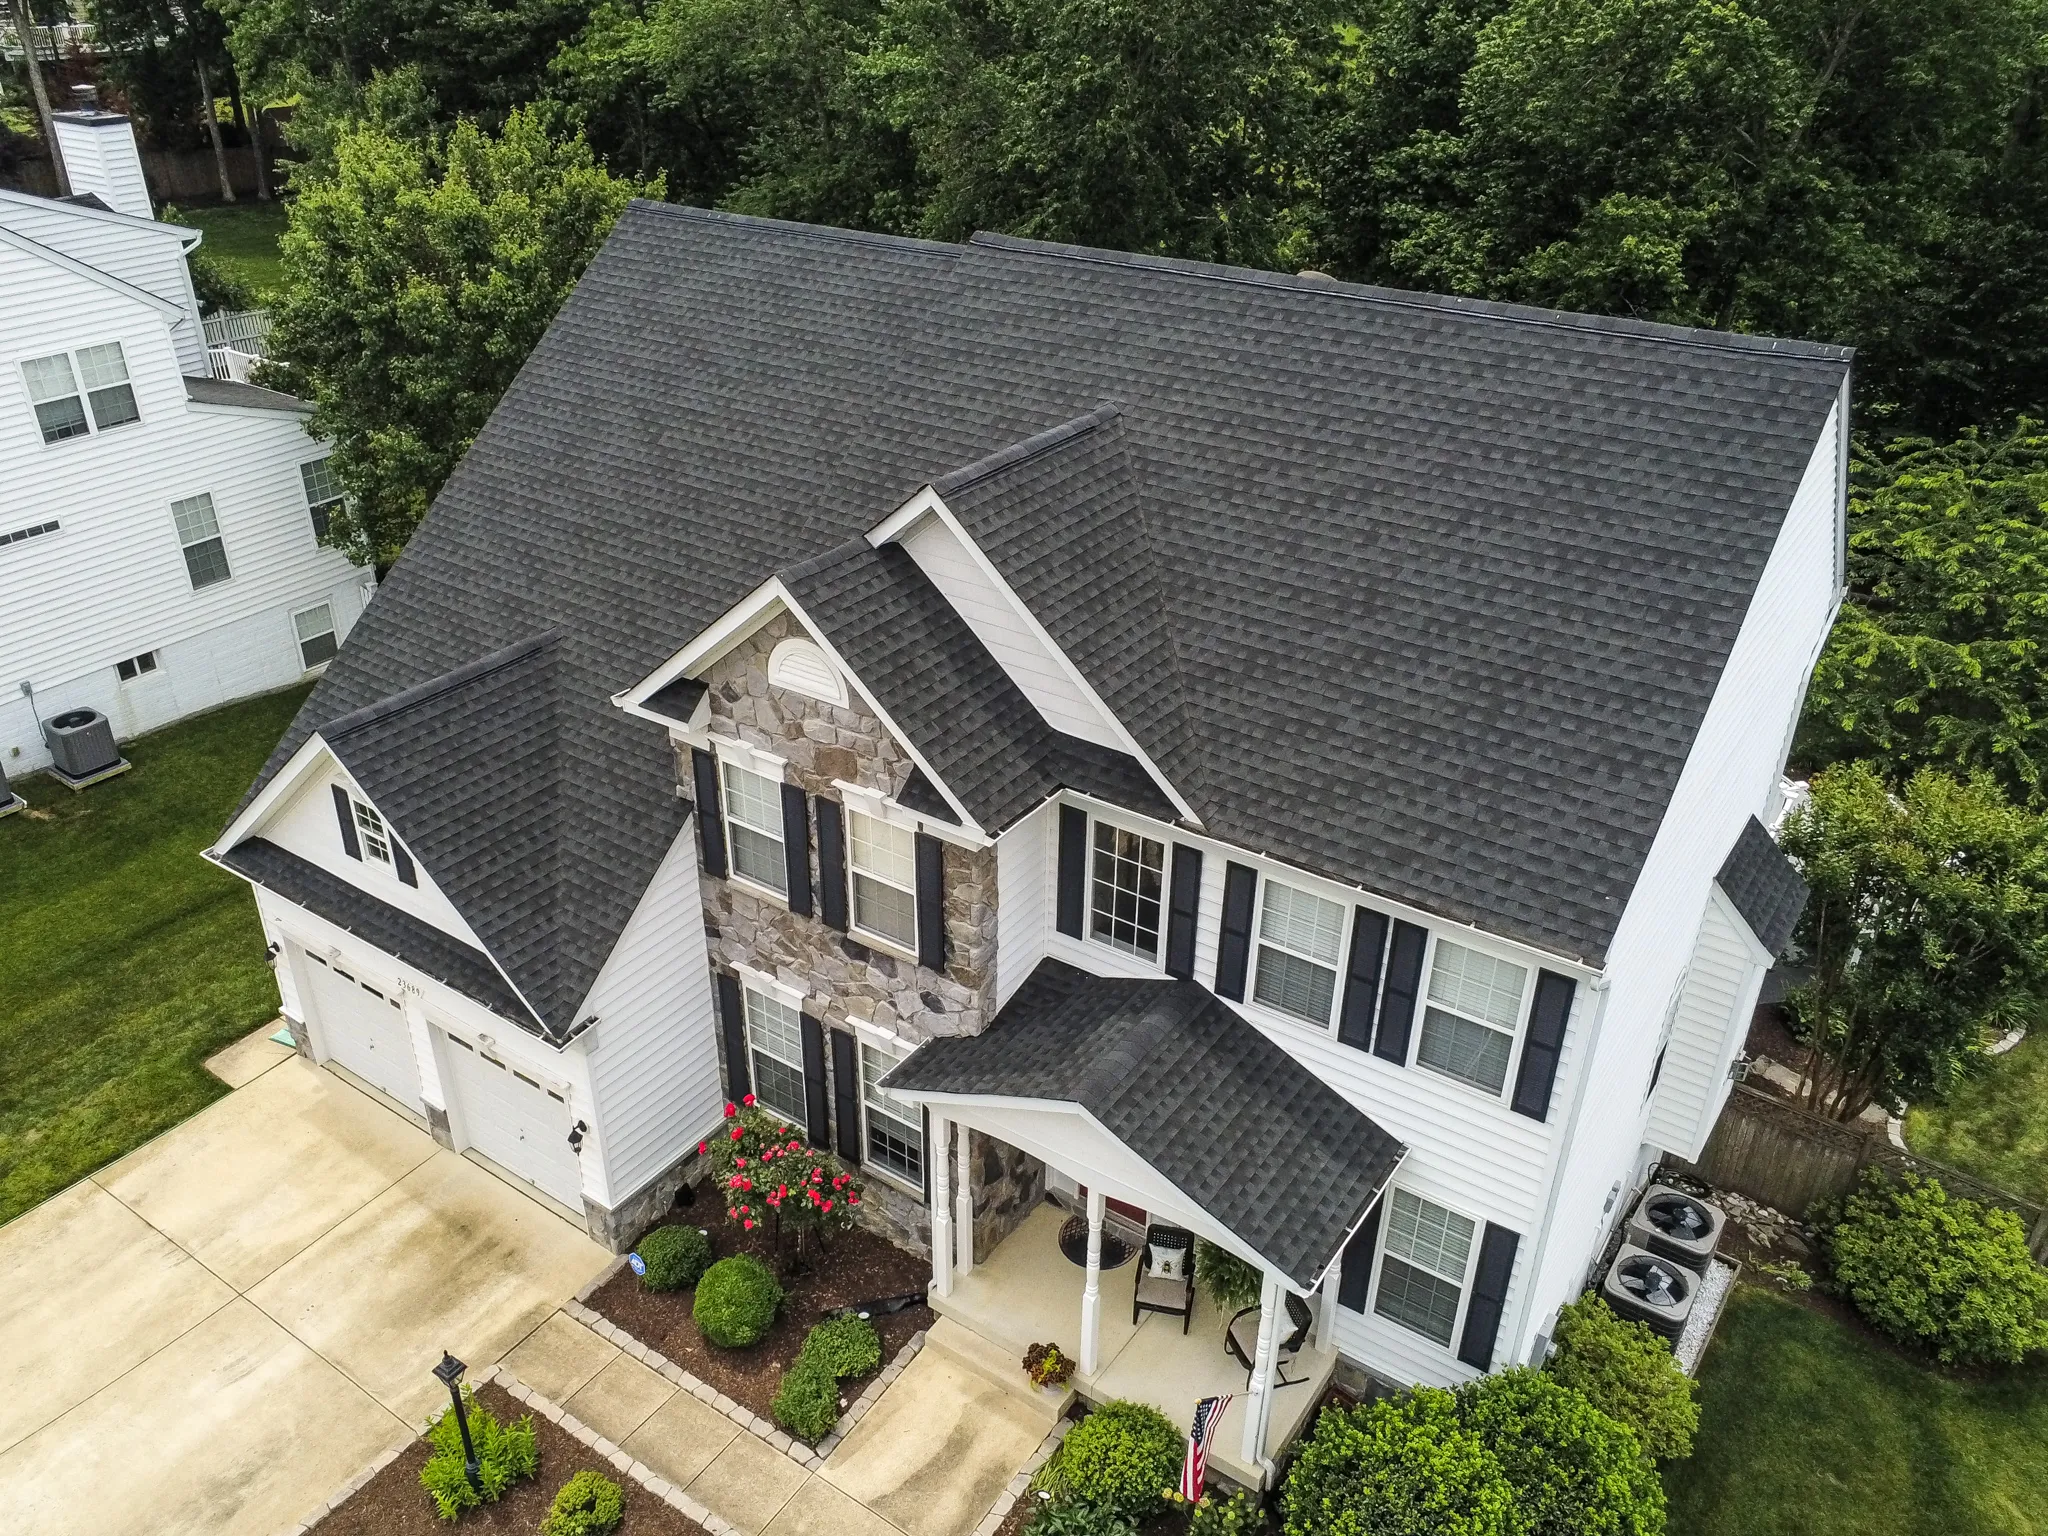 Roofing Installation for Summit Exteriors, LLC  in Mechanicsville,  MD